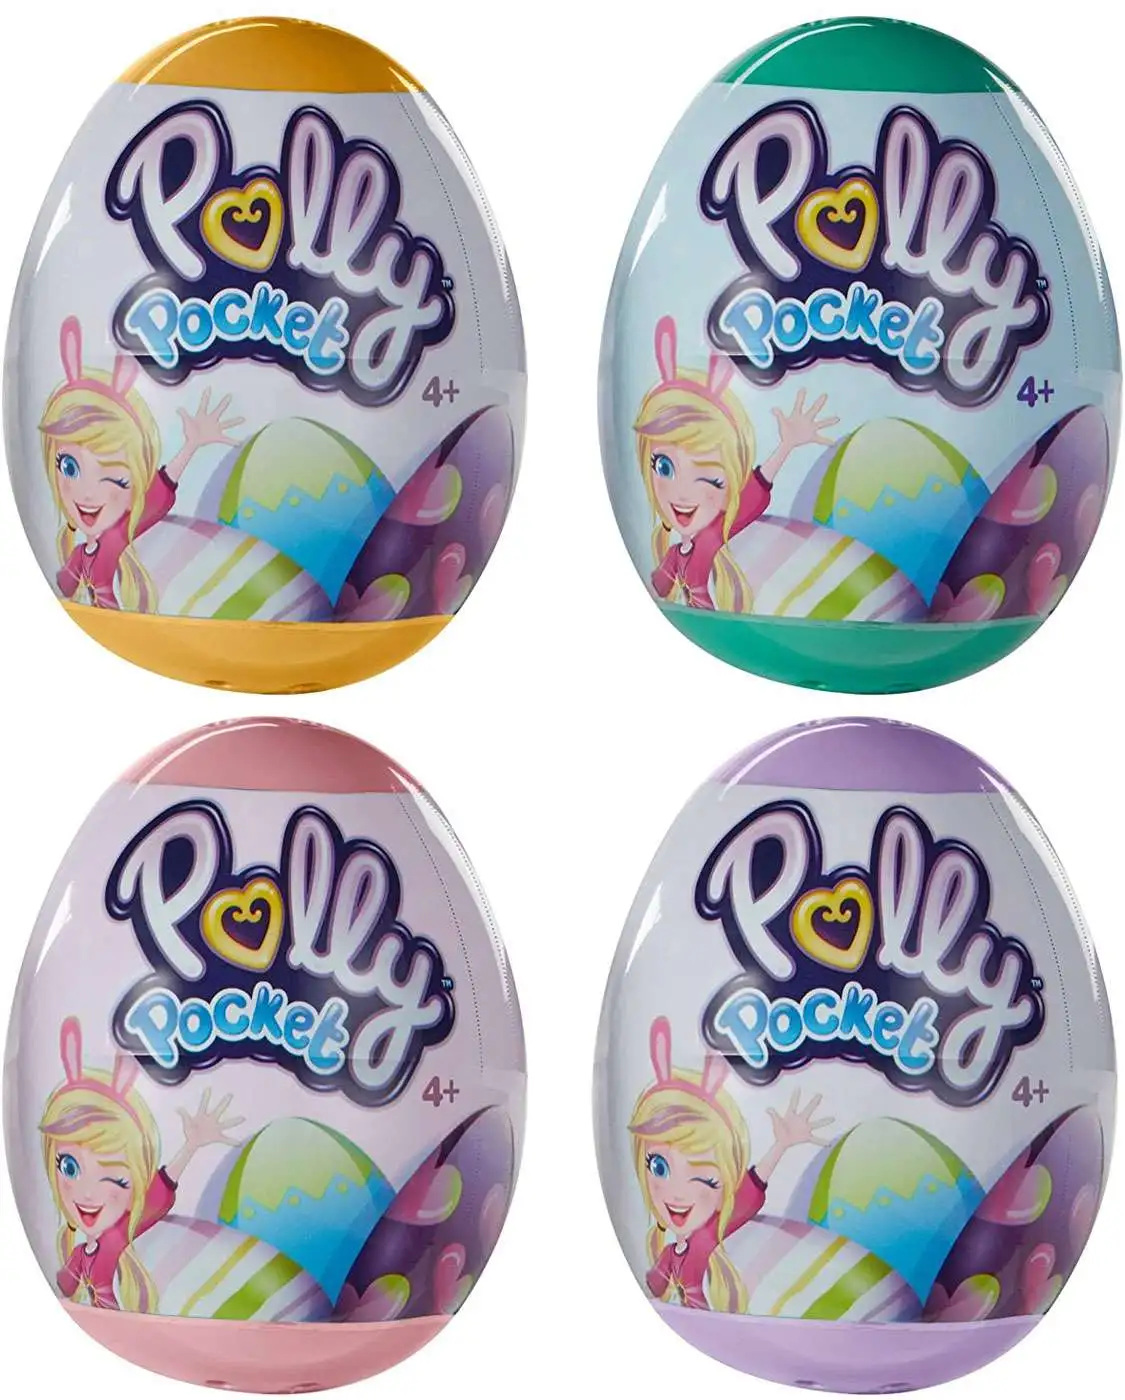 POLLY POCKET EASTER EGG 1 DOLLY AND 1 OUTFIT VIOLET 